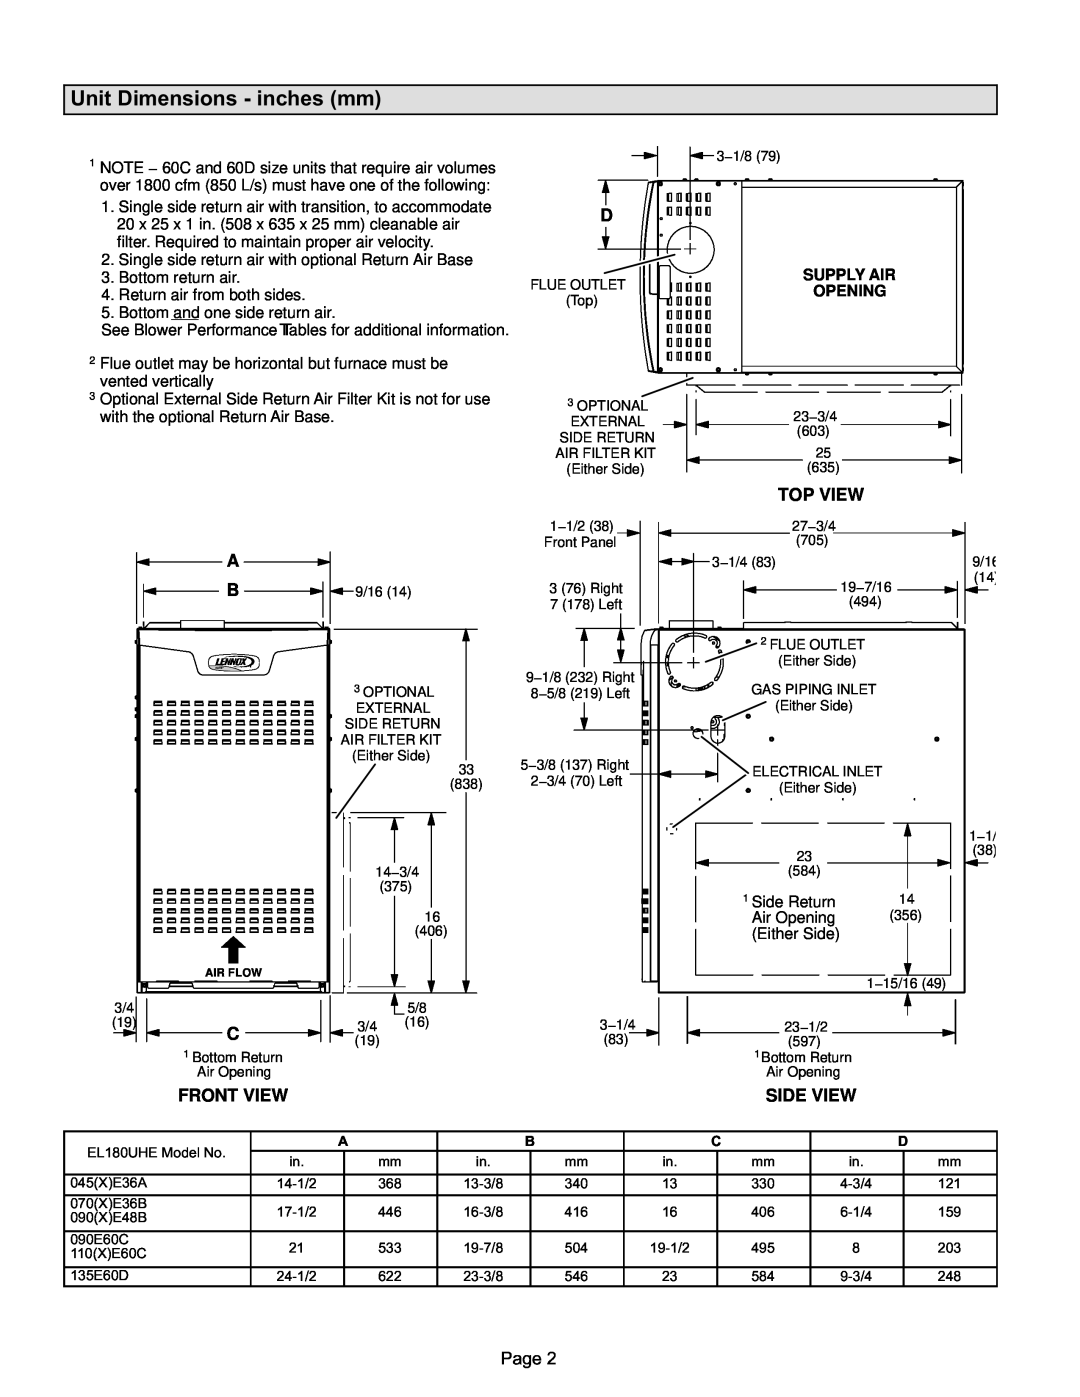 Lennox International Inc EL180UHE Unit Dimensions - inches mm, Front View, Top View, Side View, Supply Air, Opening 